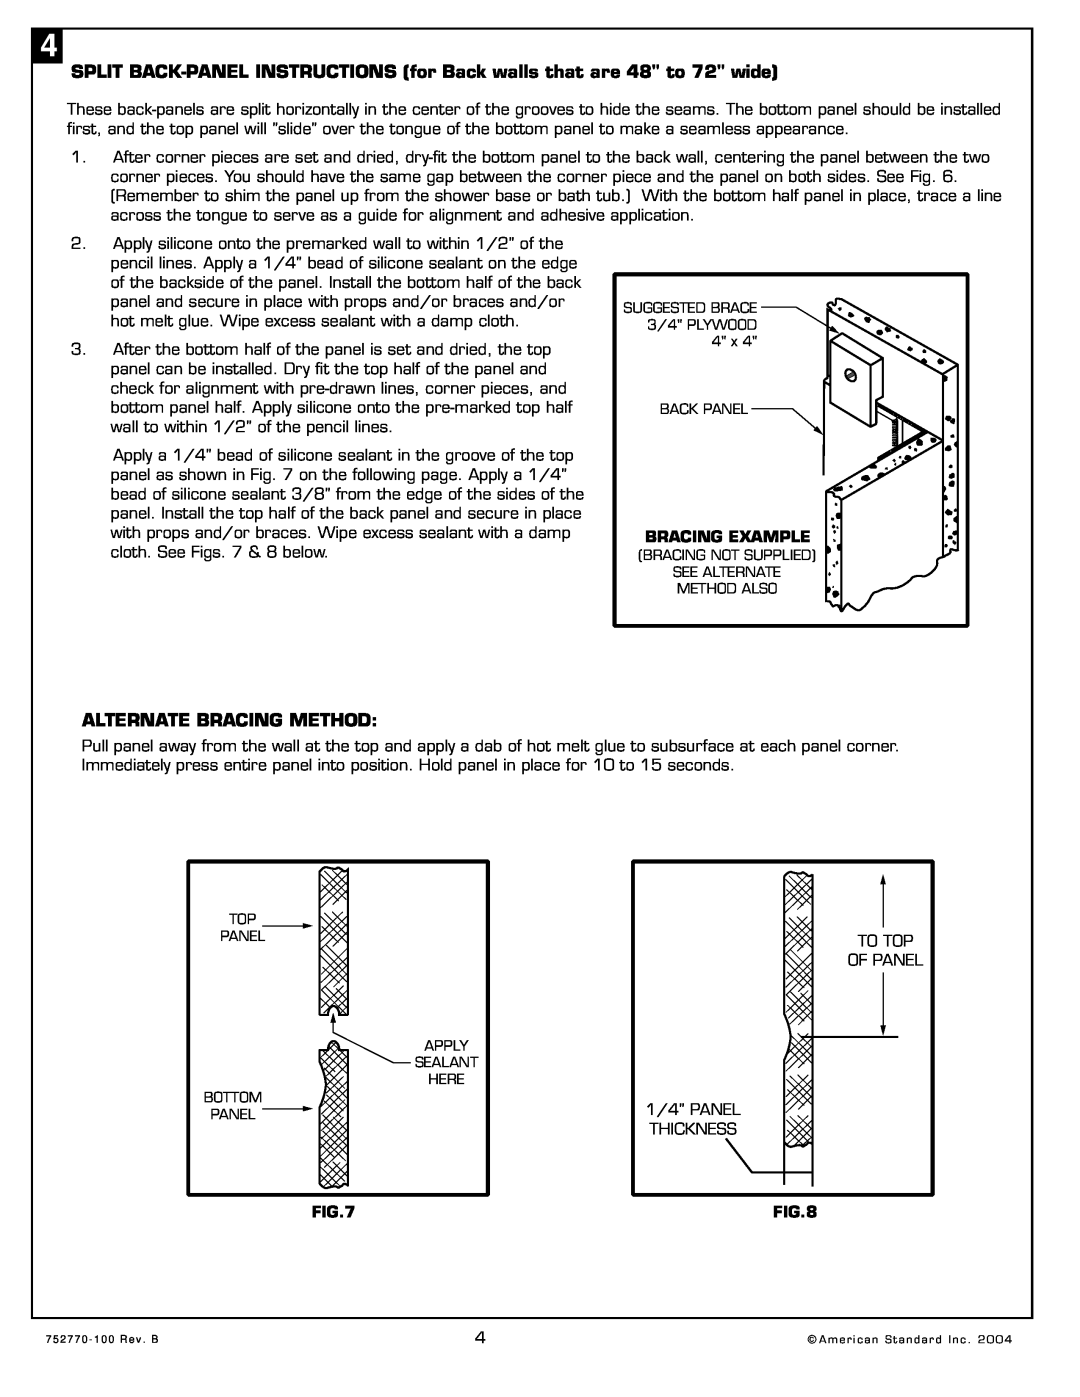 American Standard 3636.SWTS SPLIT BACK-PANEL INSTRUCTIONS for Back walls that are 48 to 72 wide, Alternate Bracing Method 